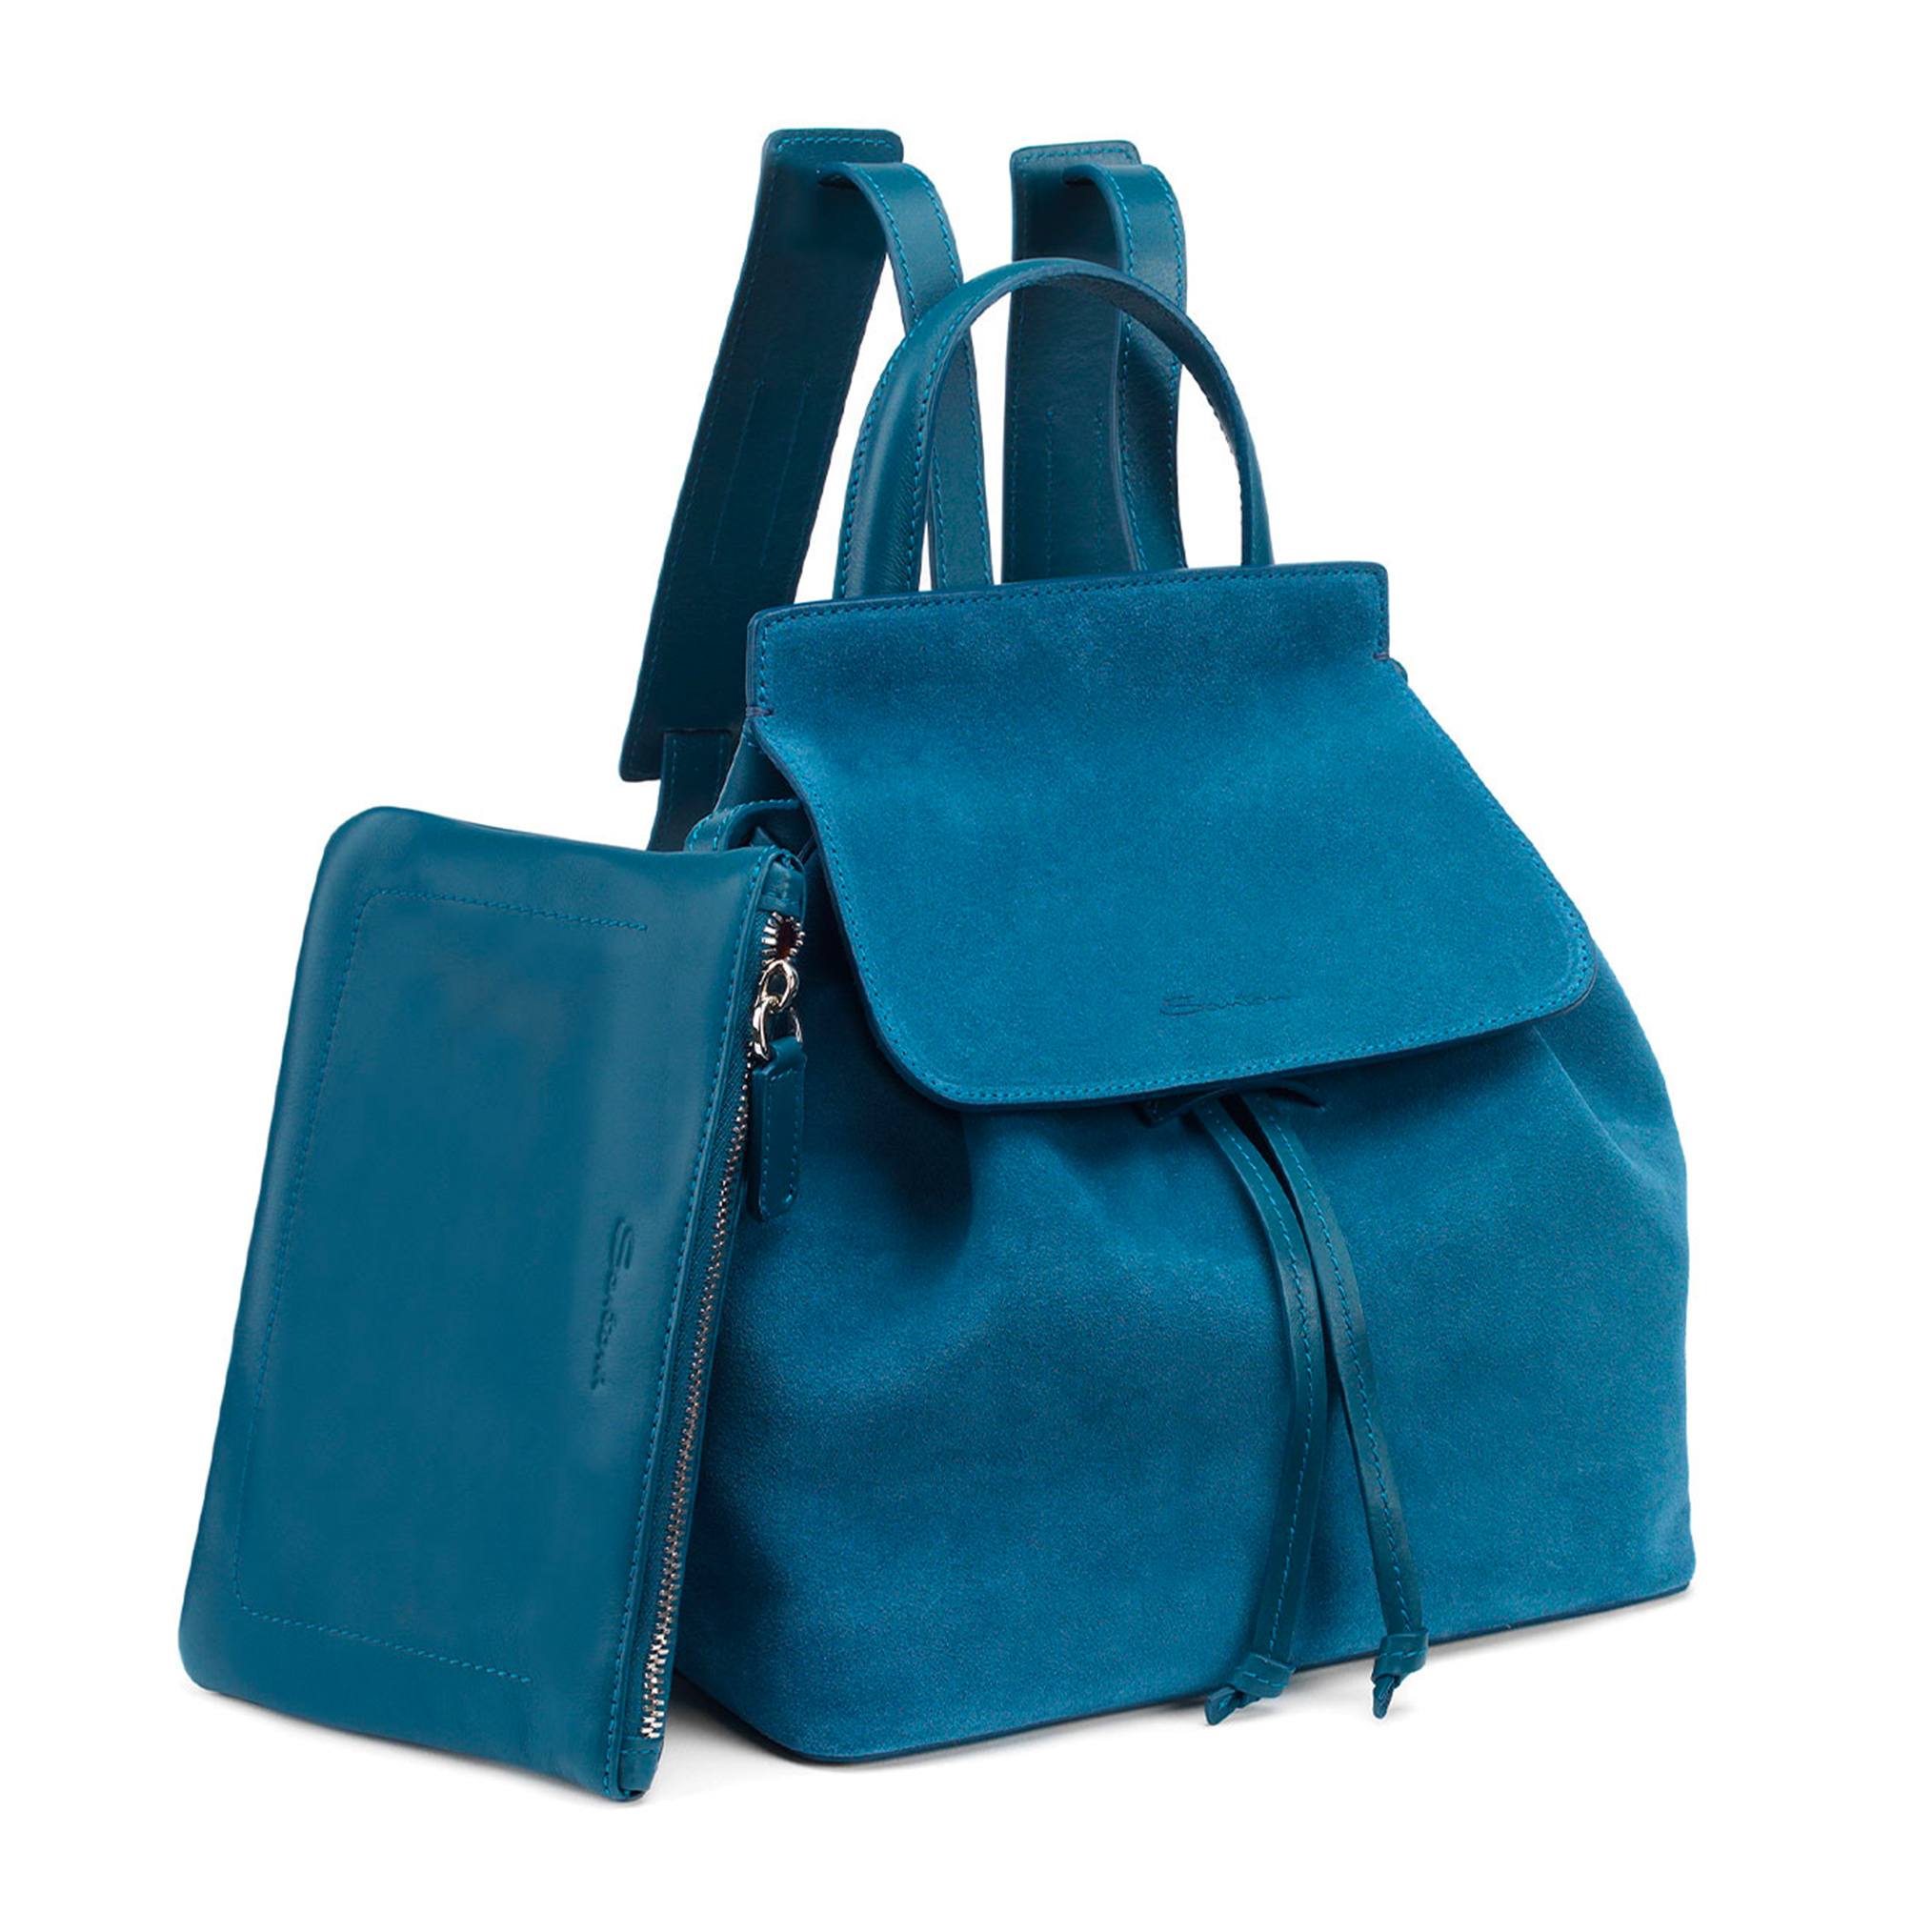 Santoni Backpack in blue suede and leather